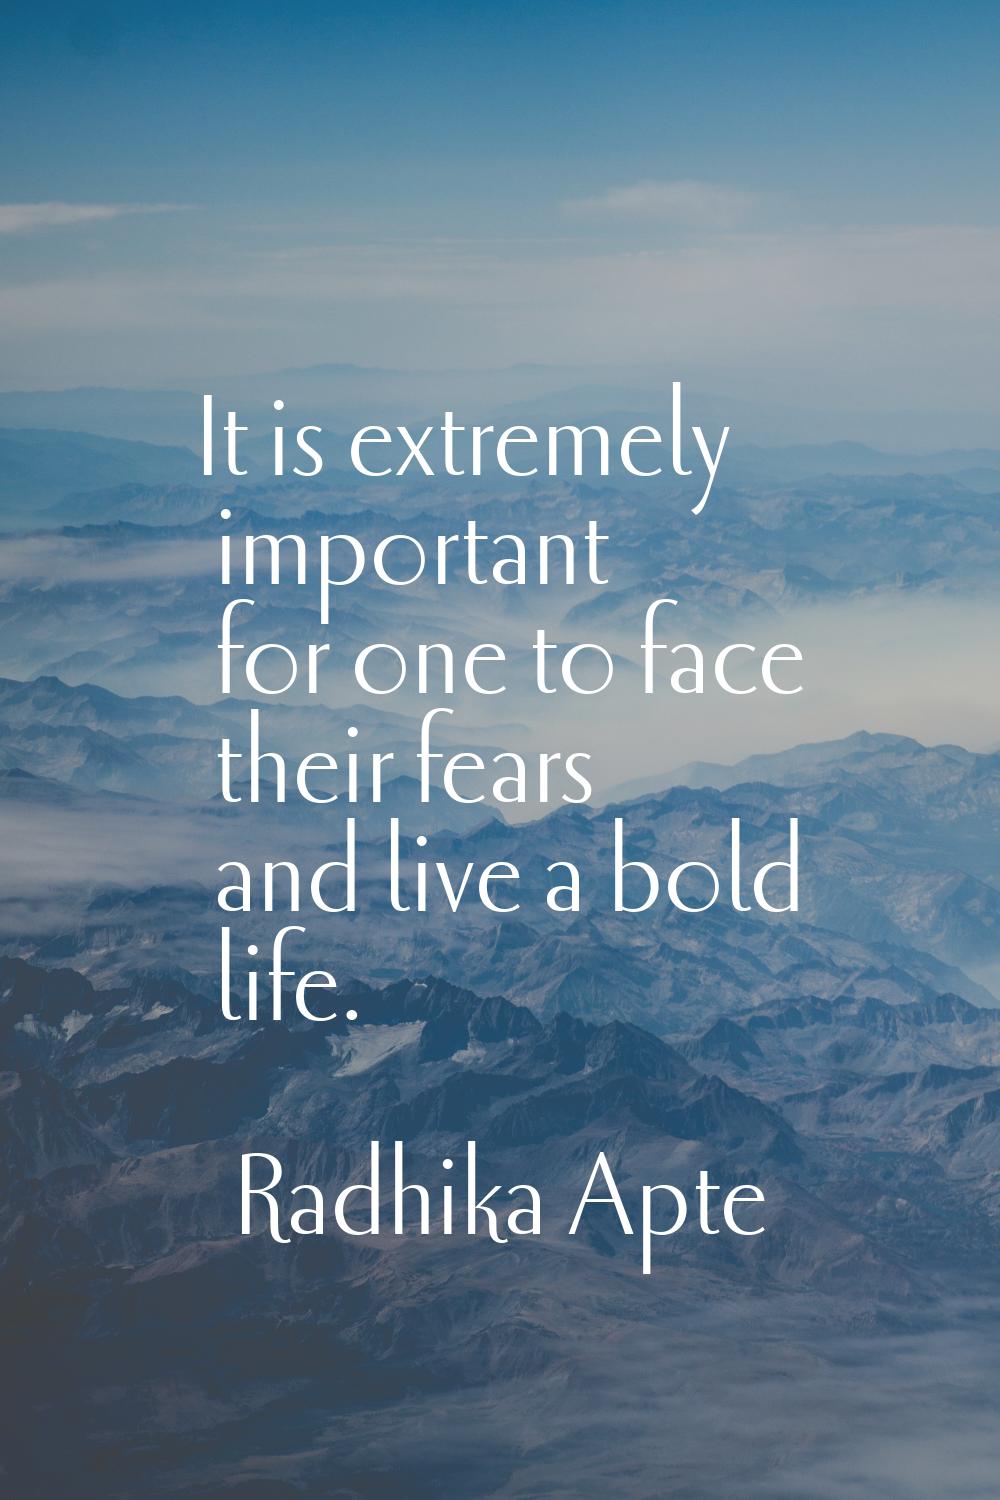 It is extremely important for one to face their fears and live a bold life.